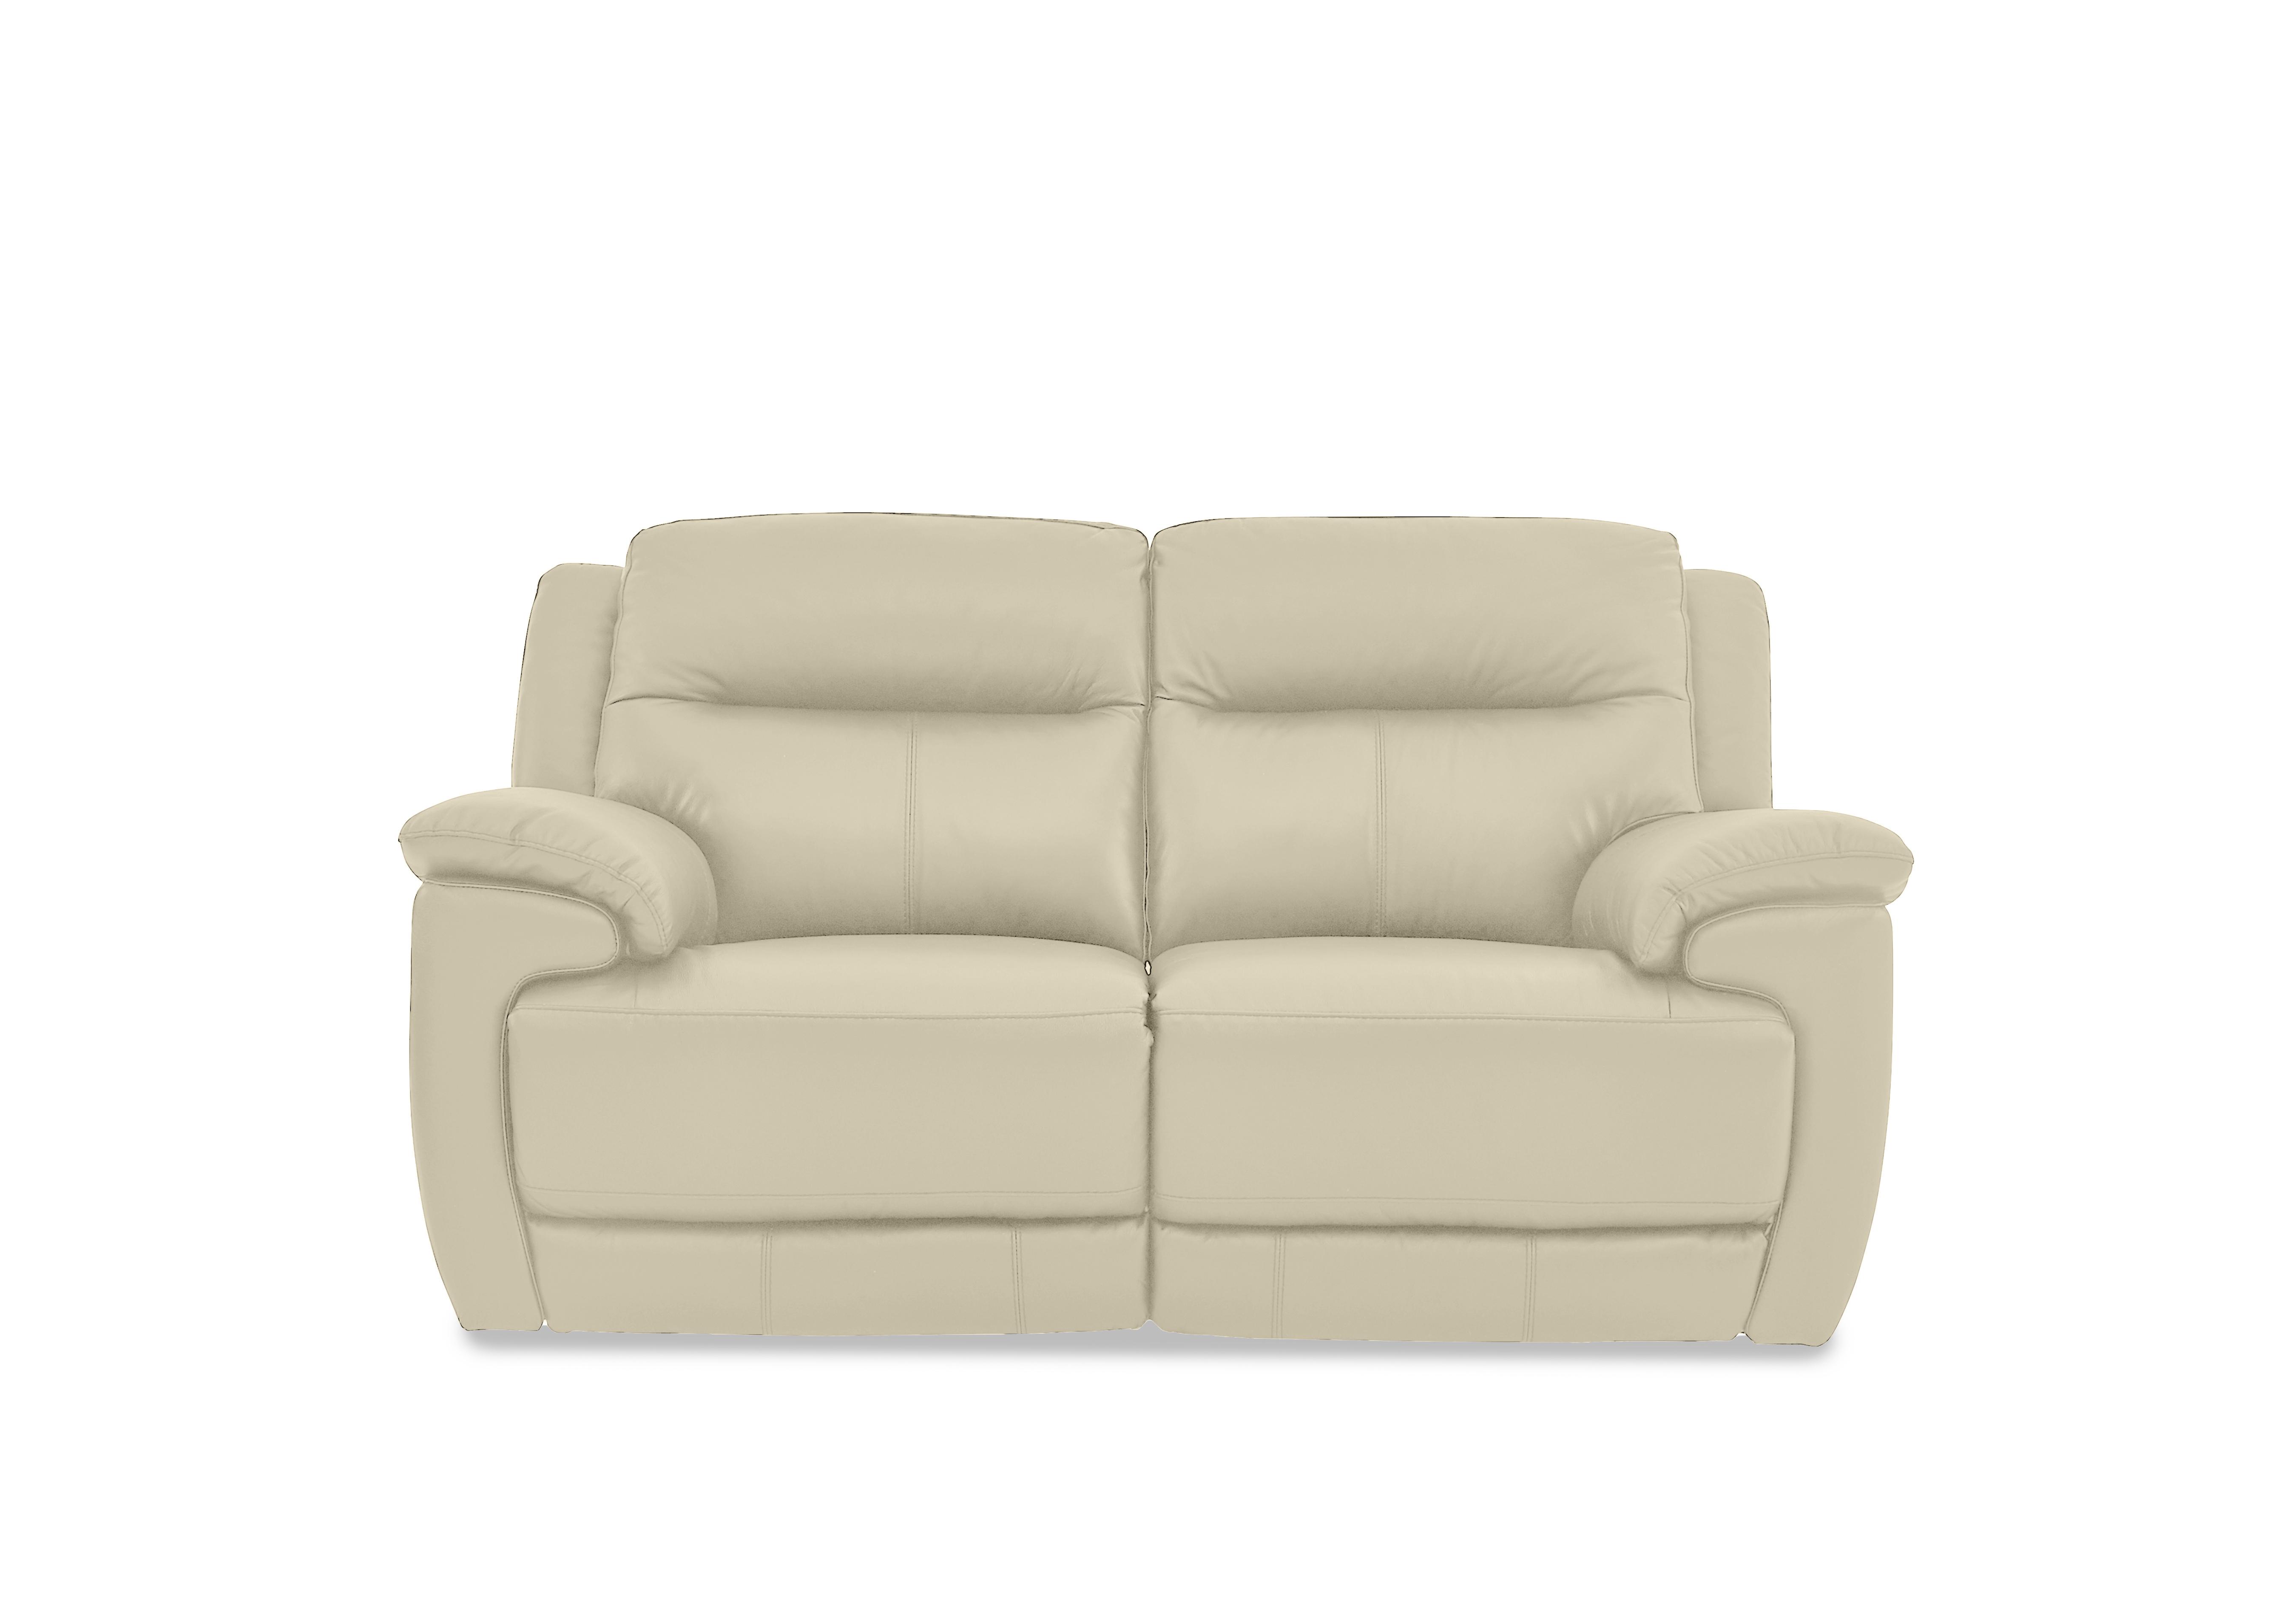 Touch 2 Seater Leather Sofa in Bv-862c Bisque on Furniture Village